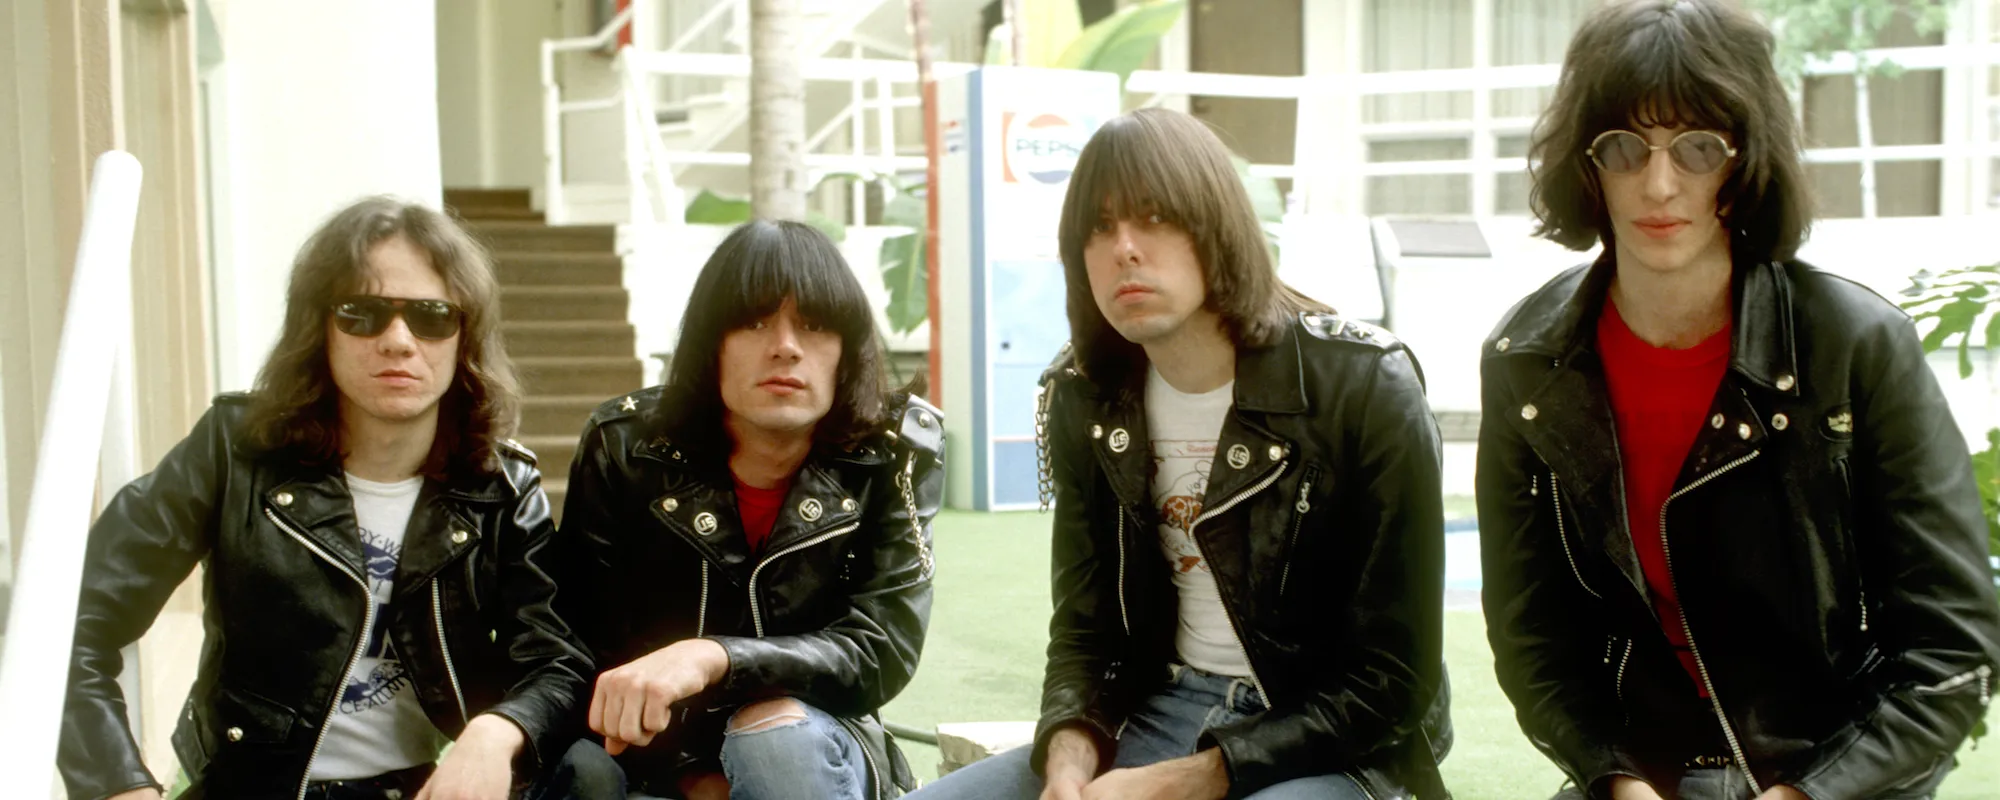 On This Day: The Ramones Played Their First Show as a Three-Piece